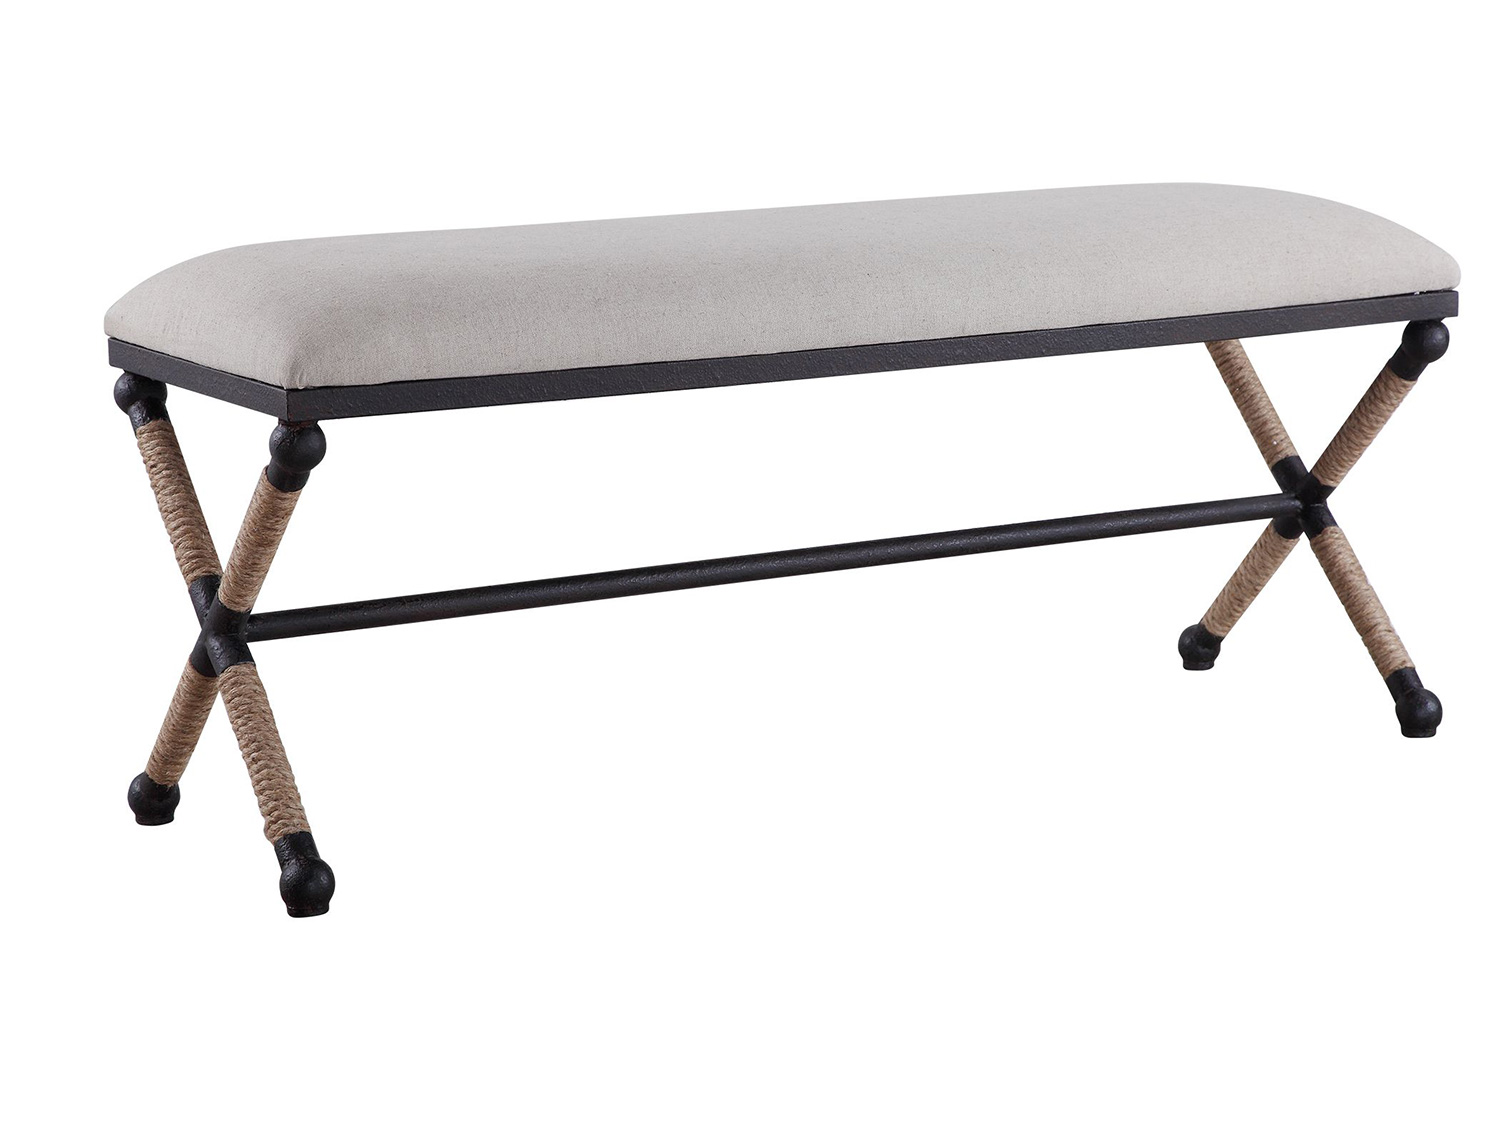 Uttermost Firth Bench - Oatmeal